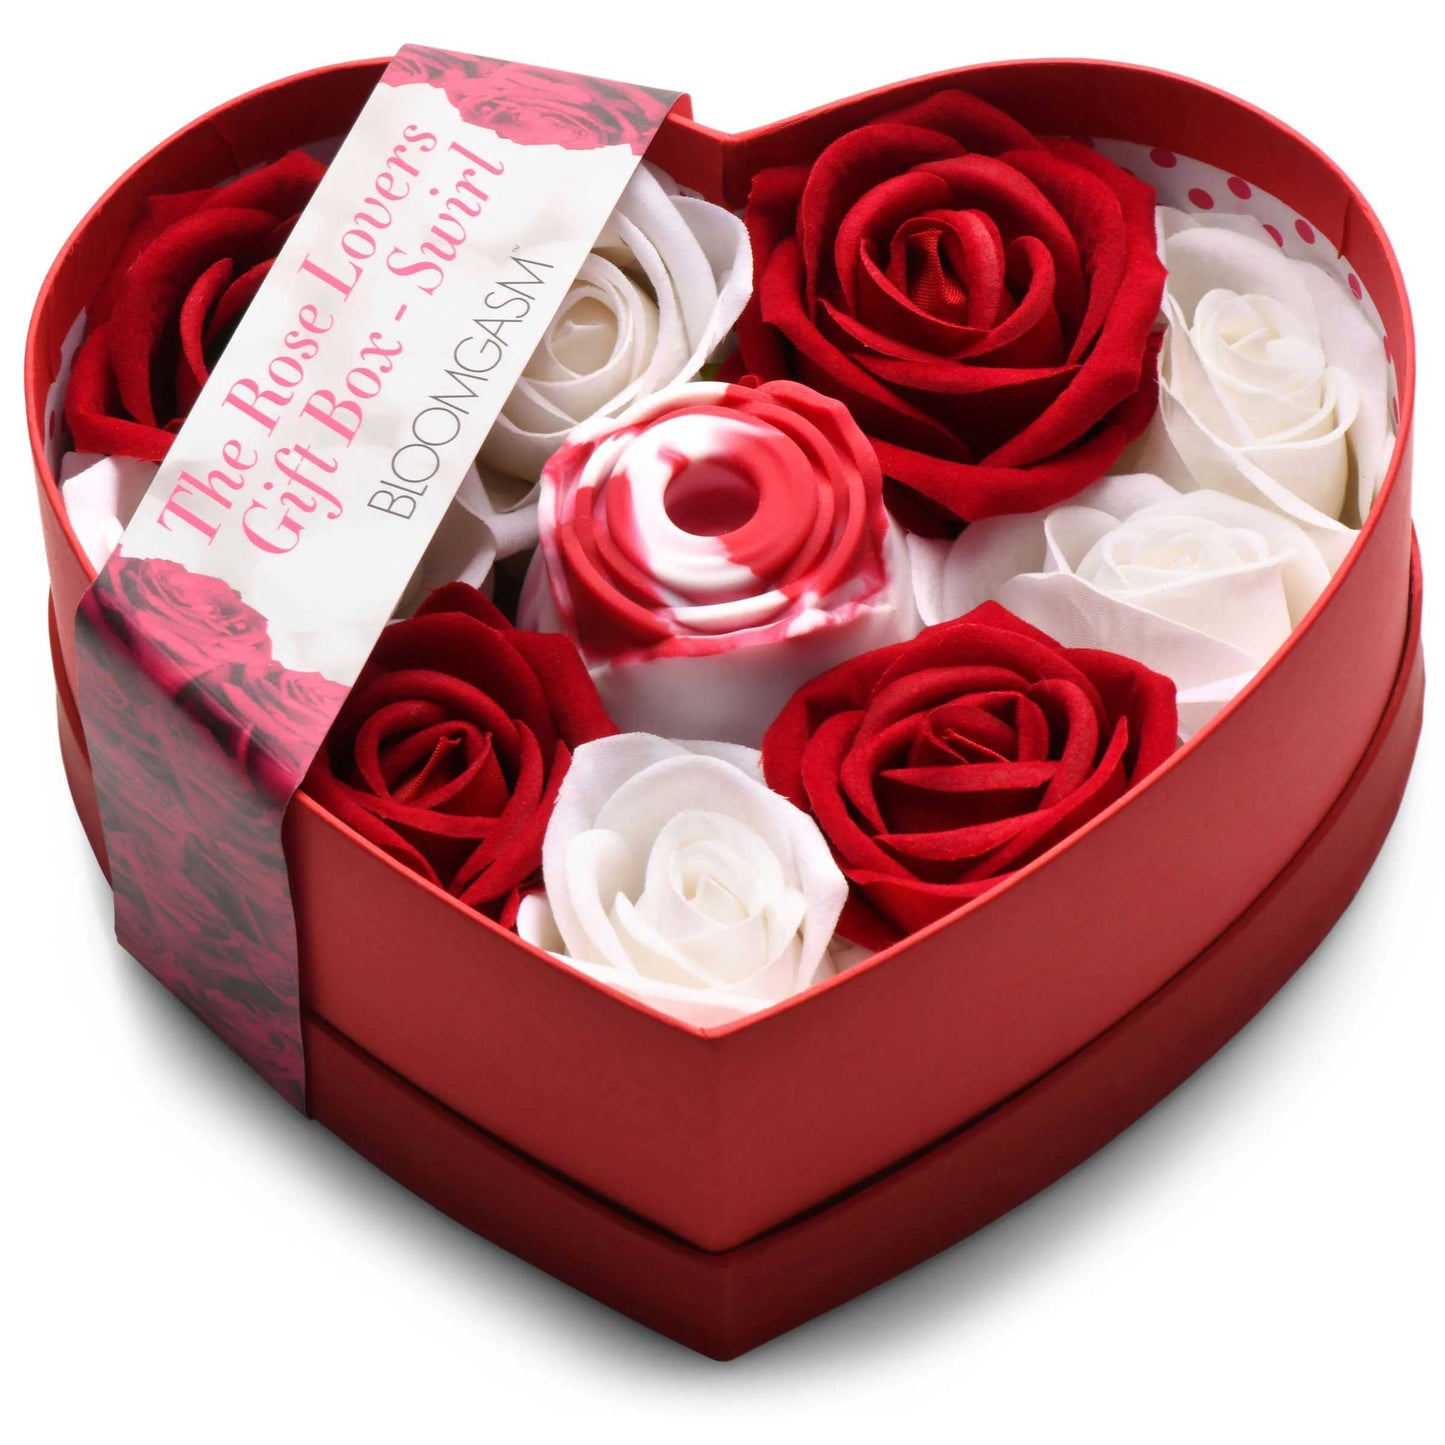 The Rose Lover's Gift Box Bloomgasm - Swirl